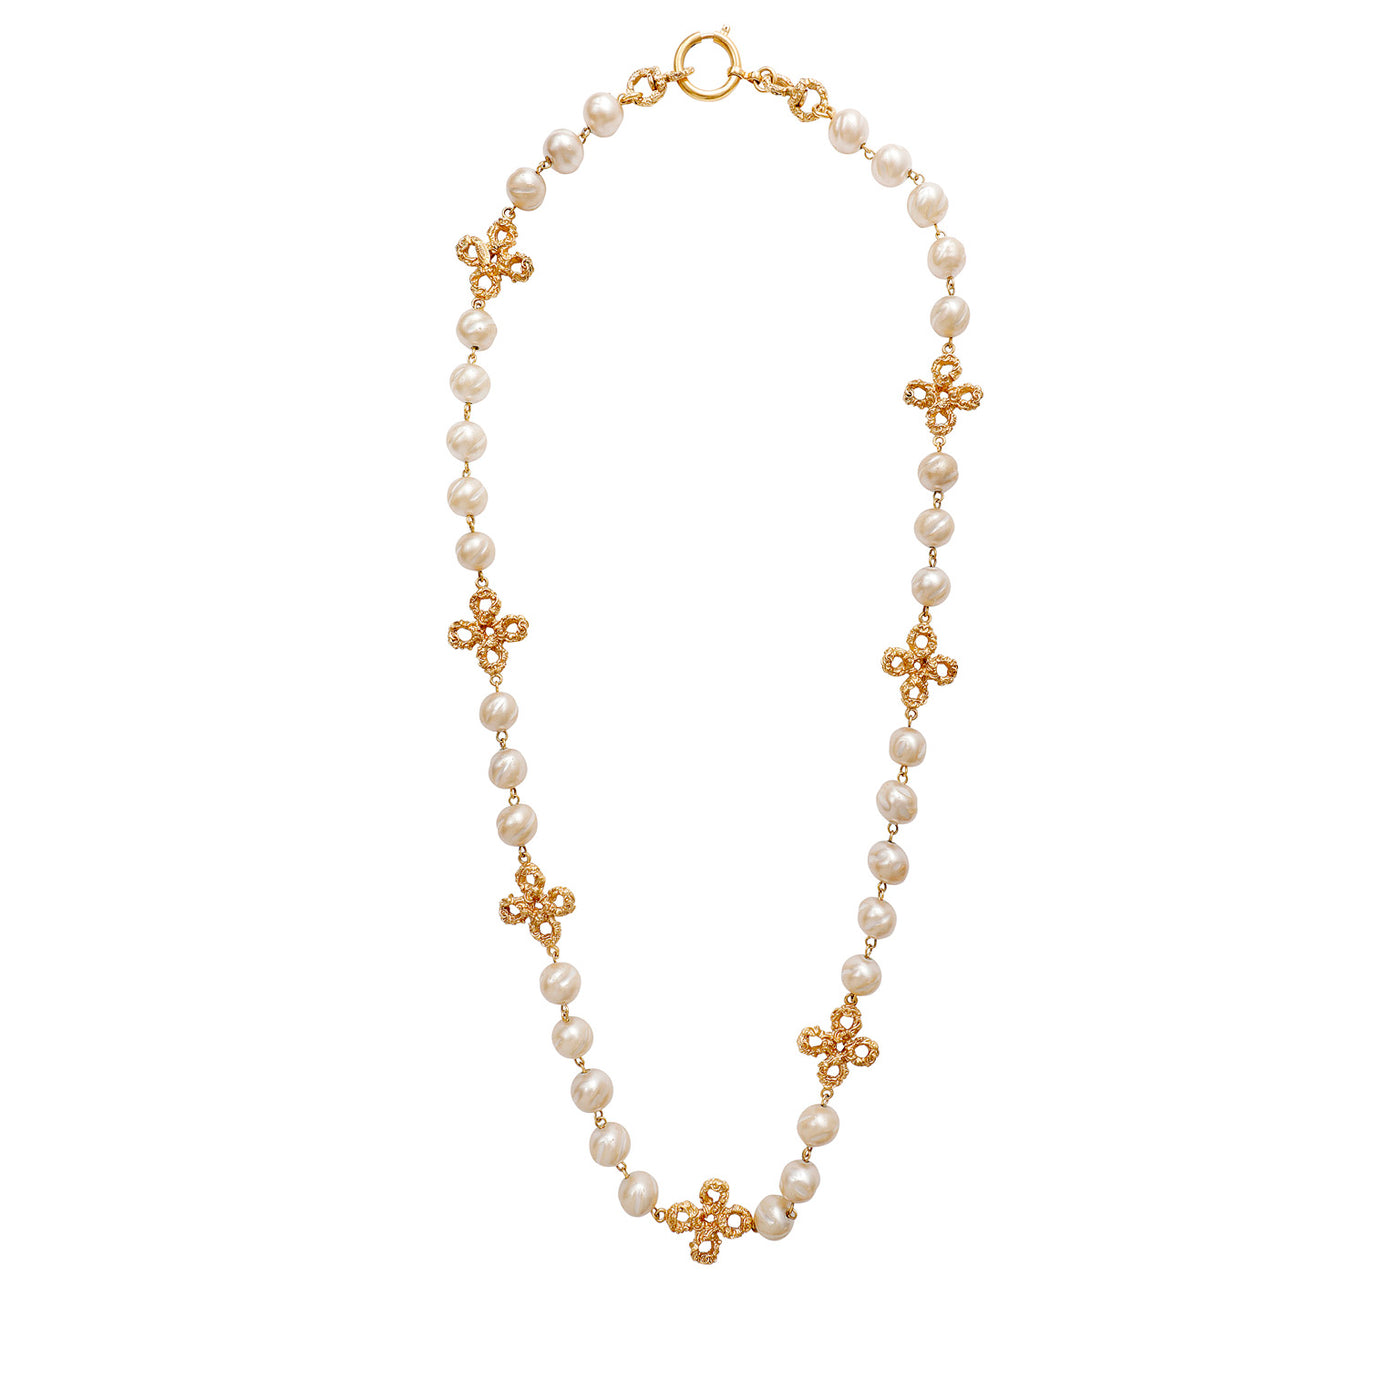 Chanel Gold Washed Wire Clovers & Pearl Necklace